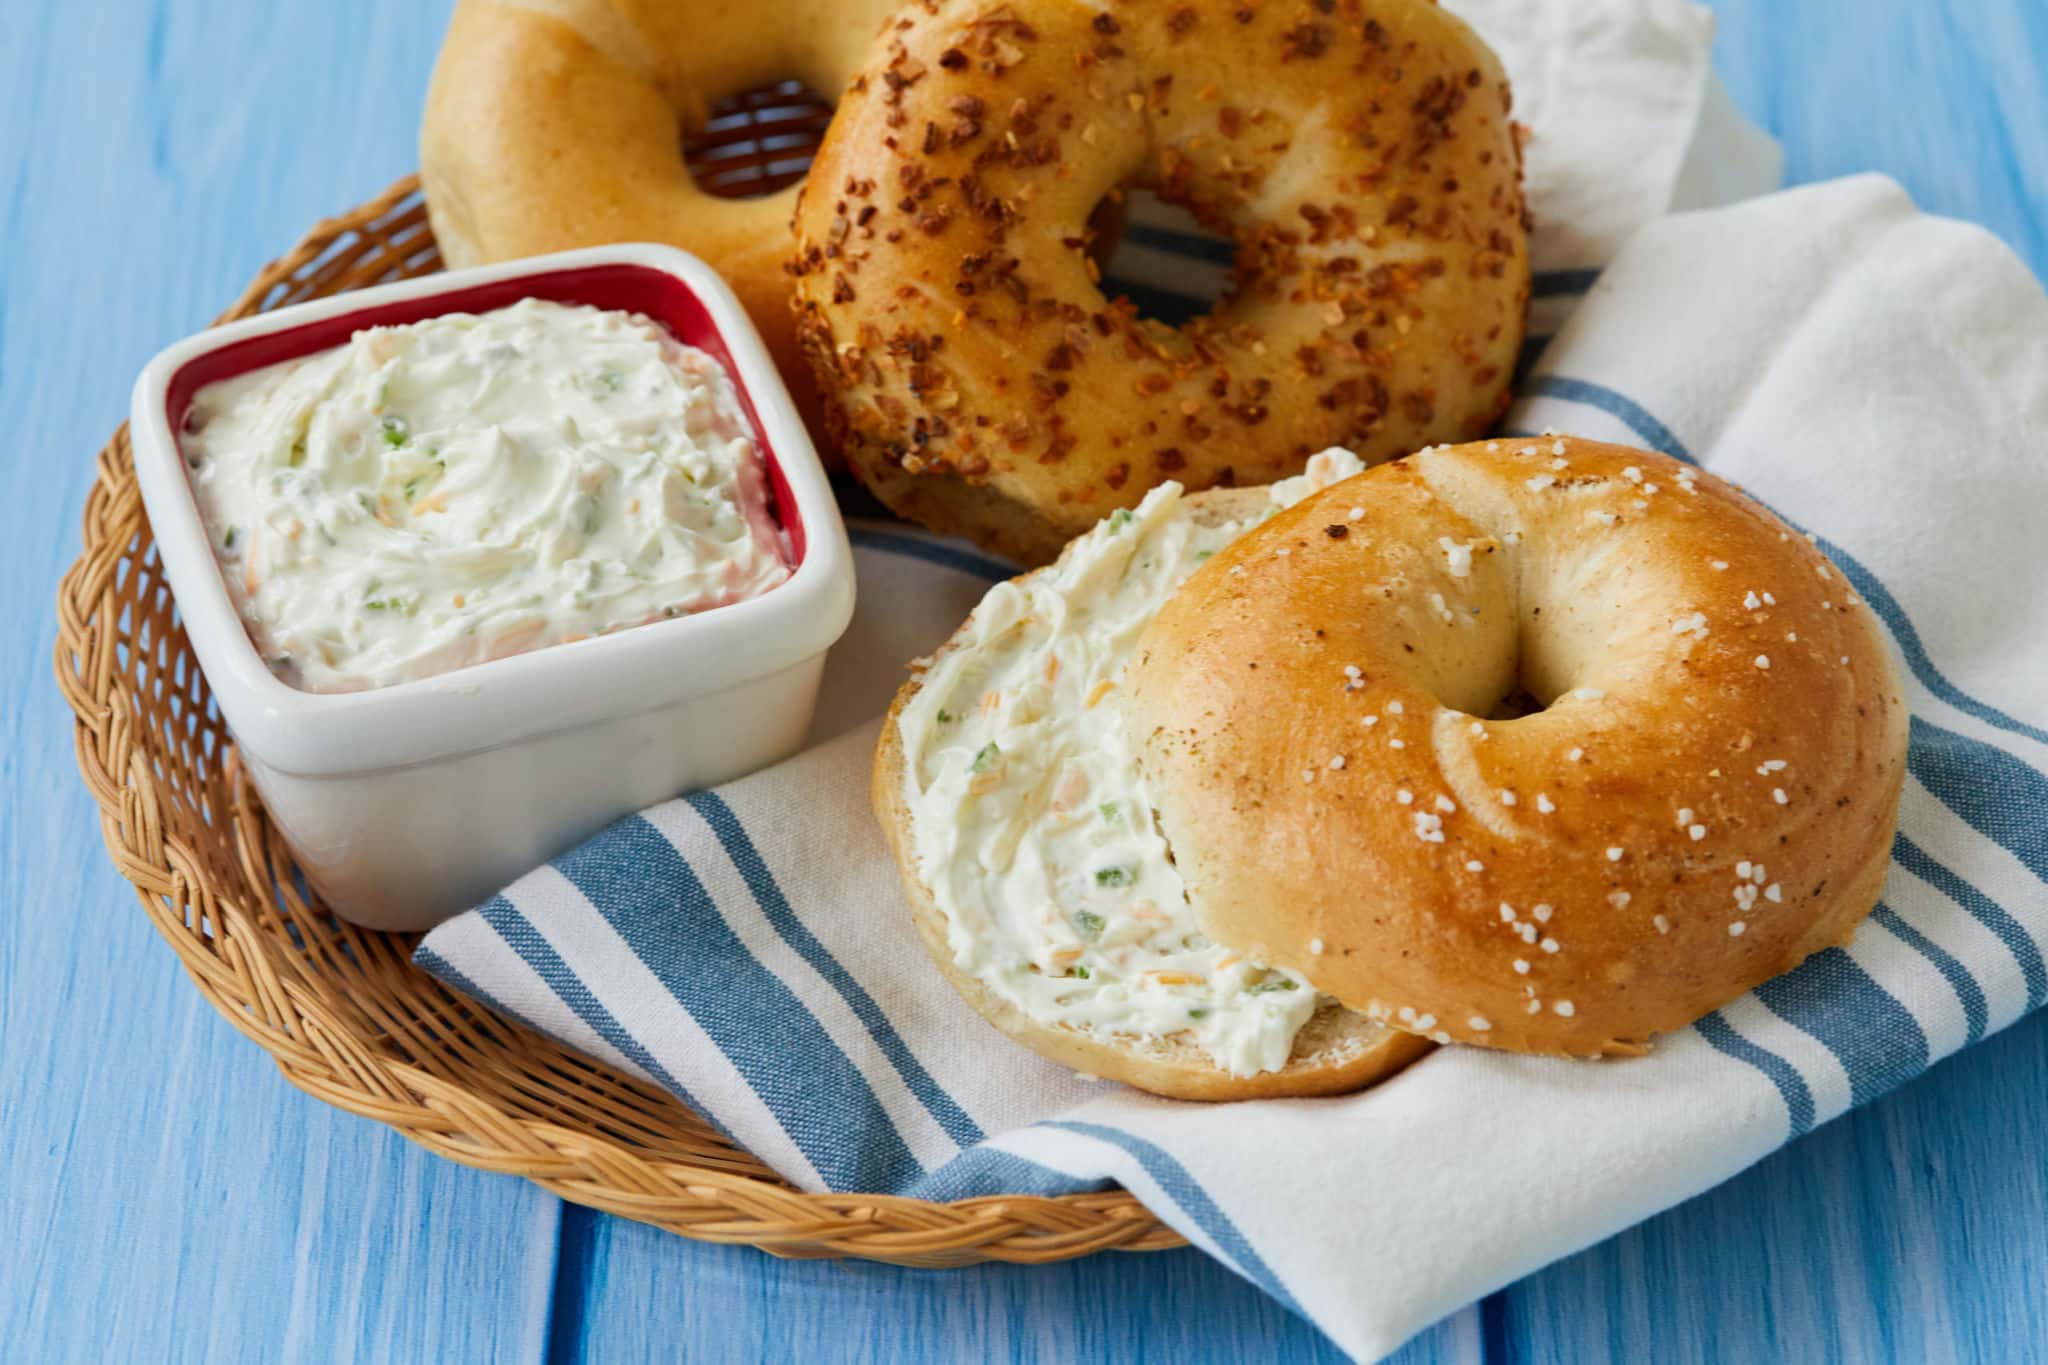 A bagel is topped with homemade jalapeno and cheddar cream cheese and sits in a basket next to two other whole bagels, one plain, one everything bagel, and a dish filled with the homemade cream cheese.